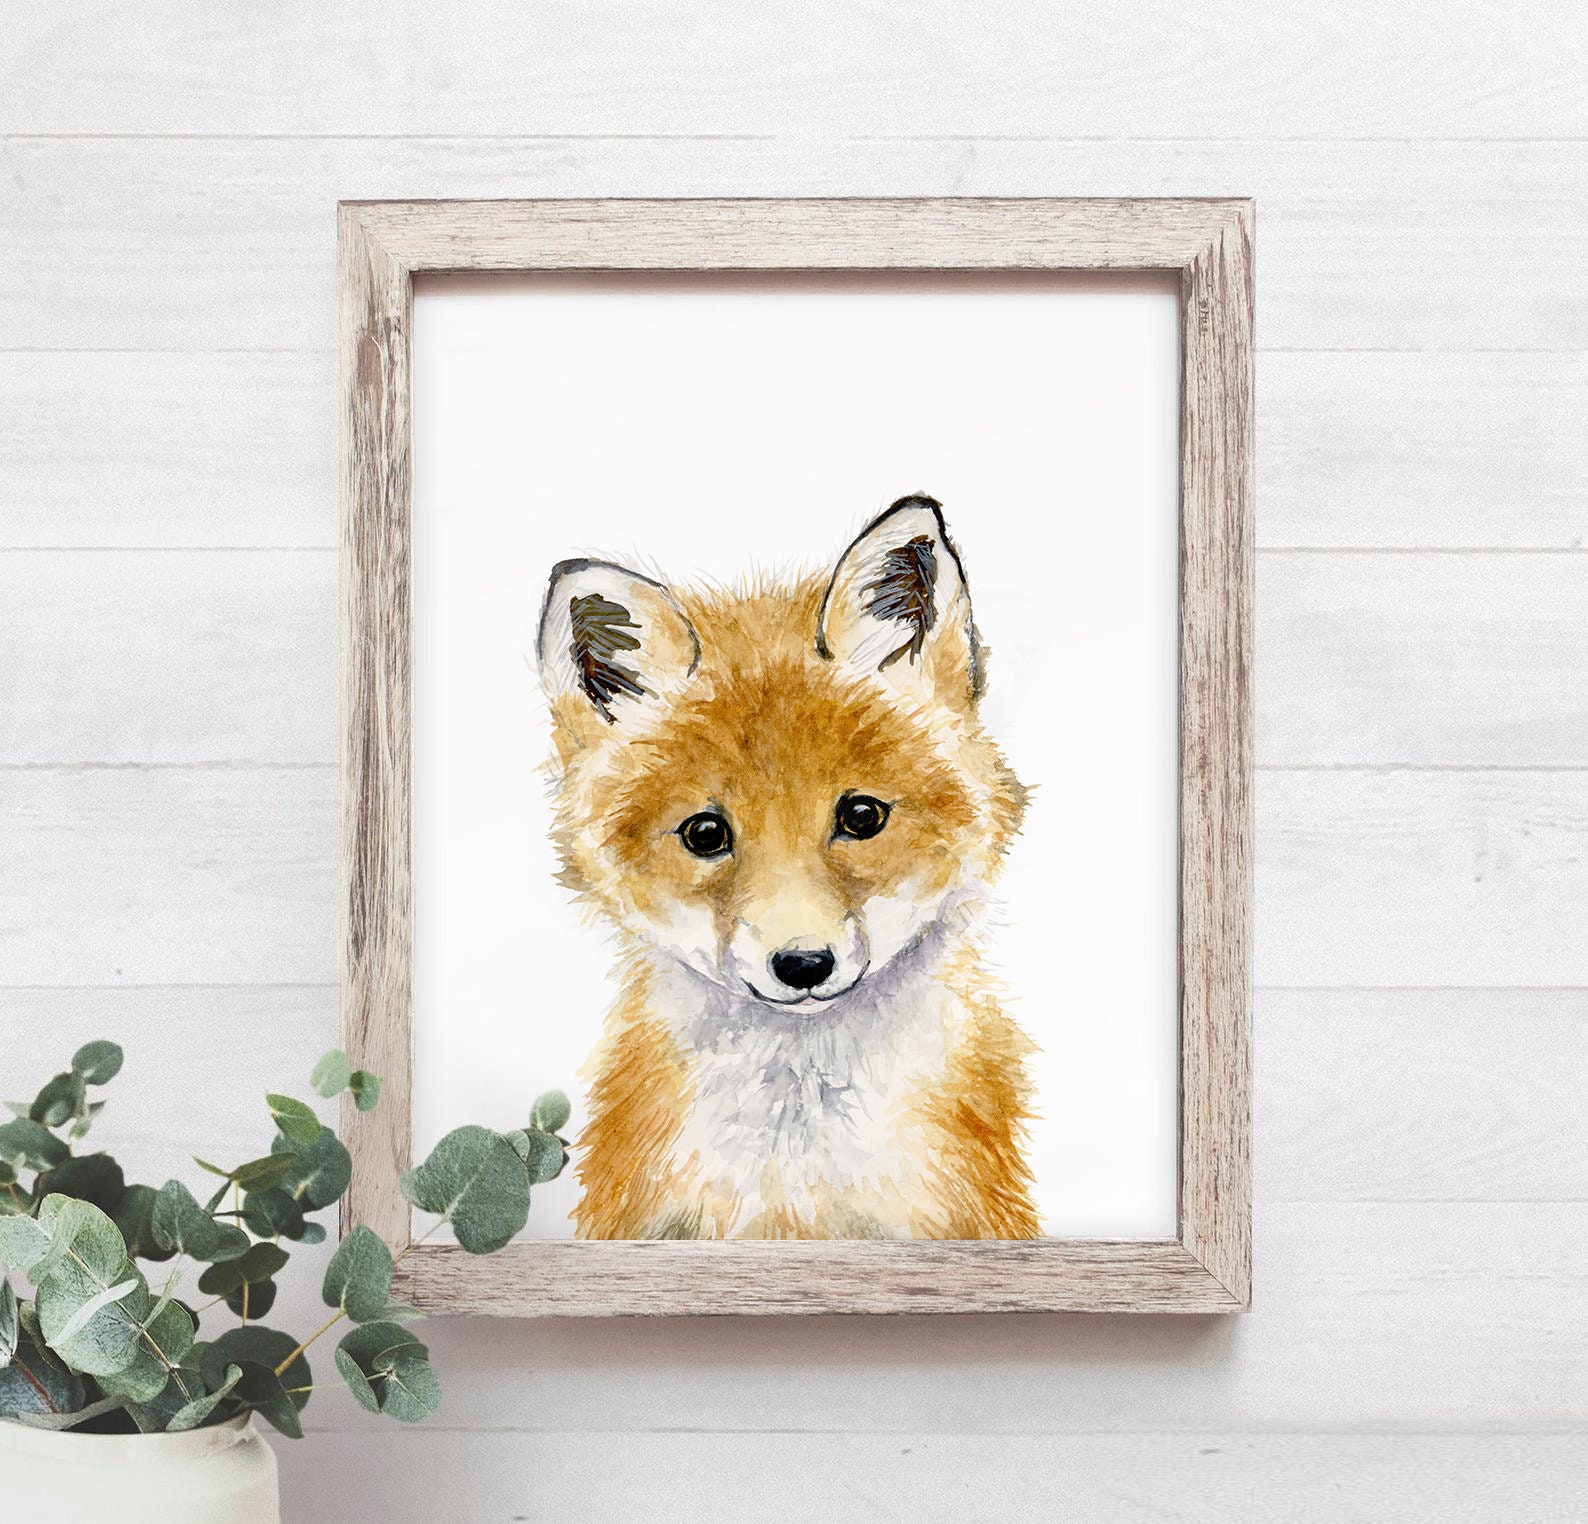 Modern Wall Art Canvas Painting Watercolor Animal Posters And Prints  Abstract Fox Wall Picture For Kids Room Decoration No Frame - Painting &  Calligraphy - AliExpress